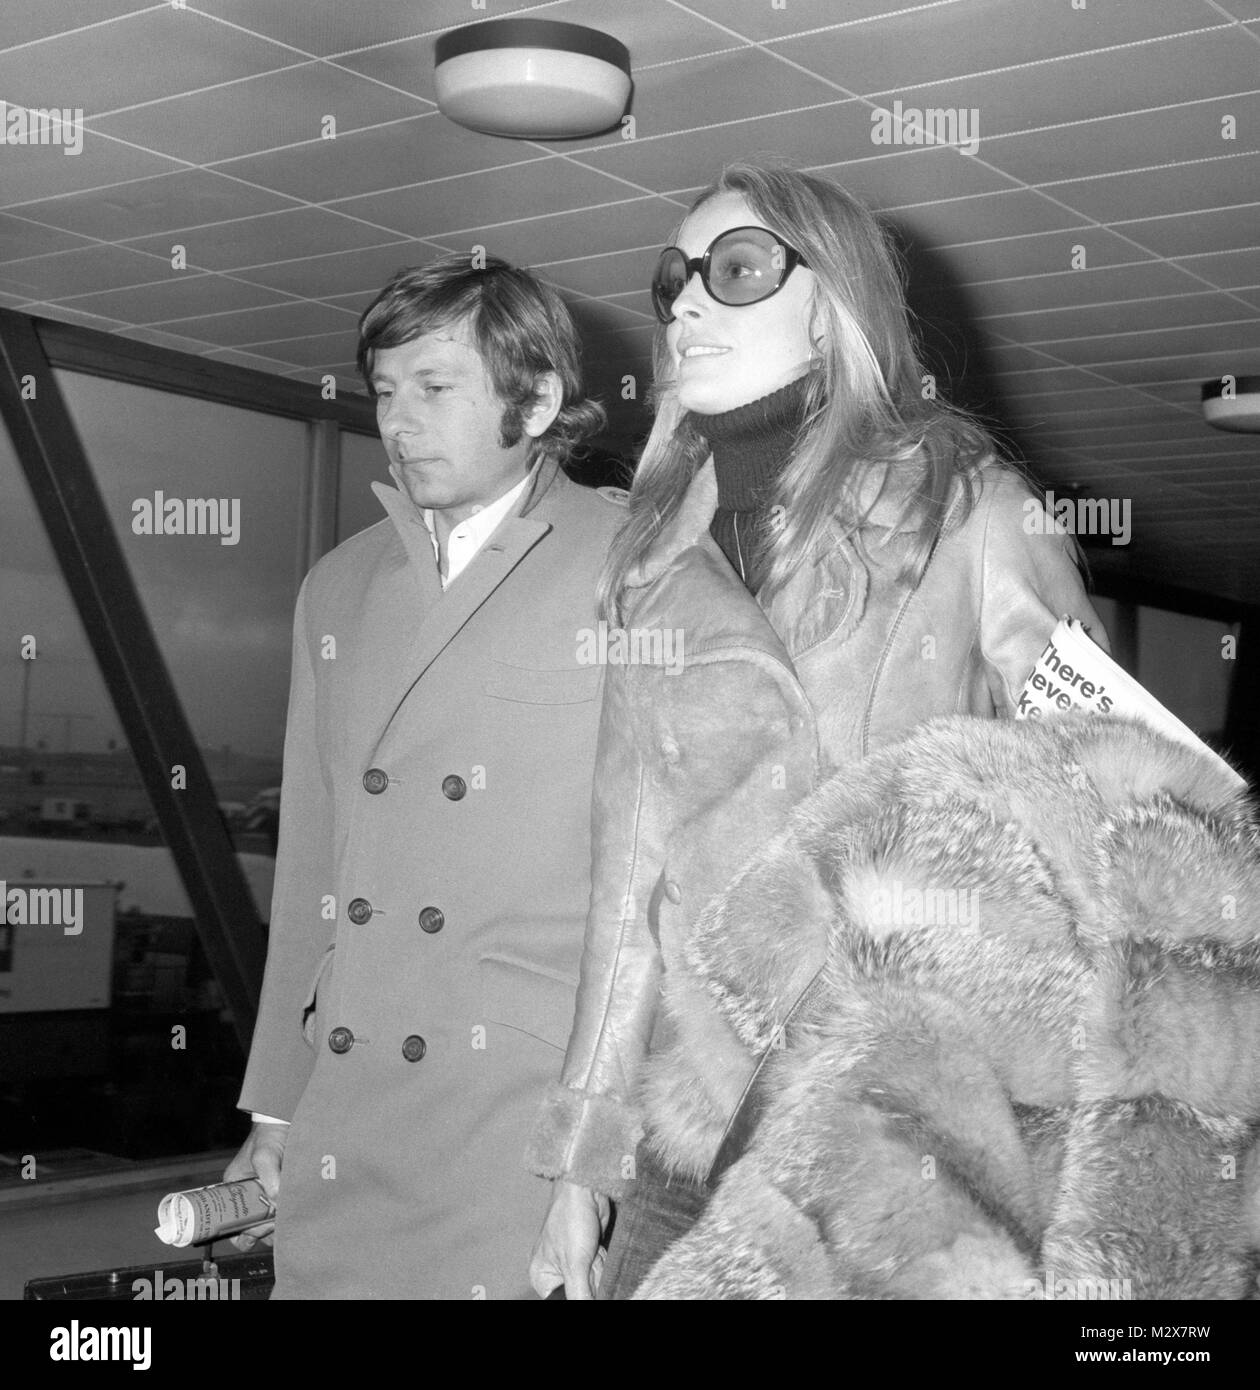 American-born actress Sharon Tate arrives with her husband Roman Polanski, at Heathrow Airport, London, from Venice to attend the premiere of her film 'Rosemary's Baby'. Stock Photo